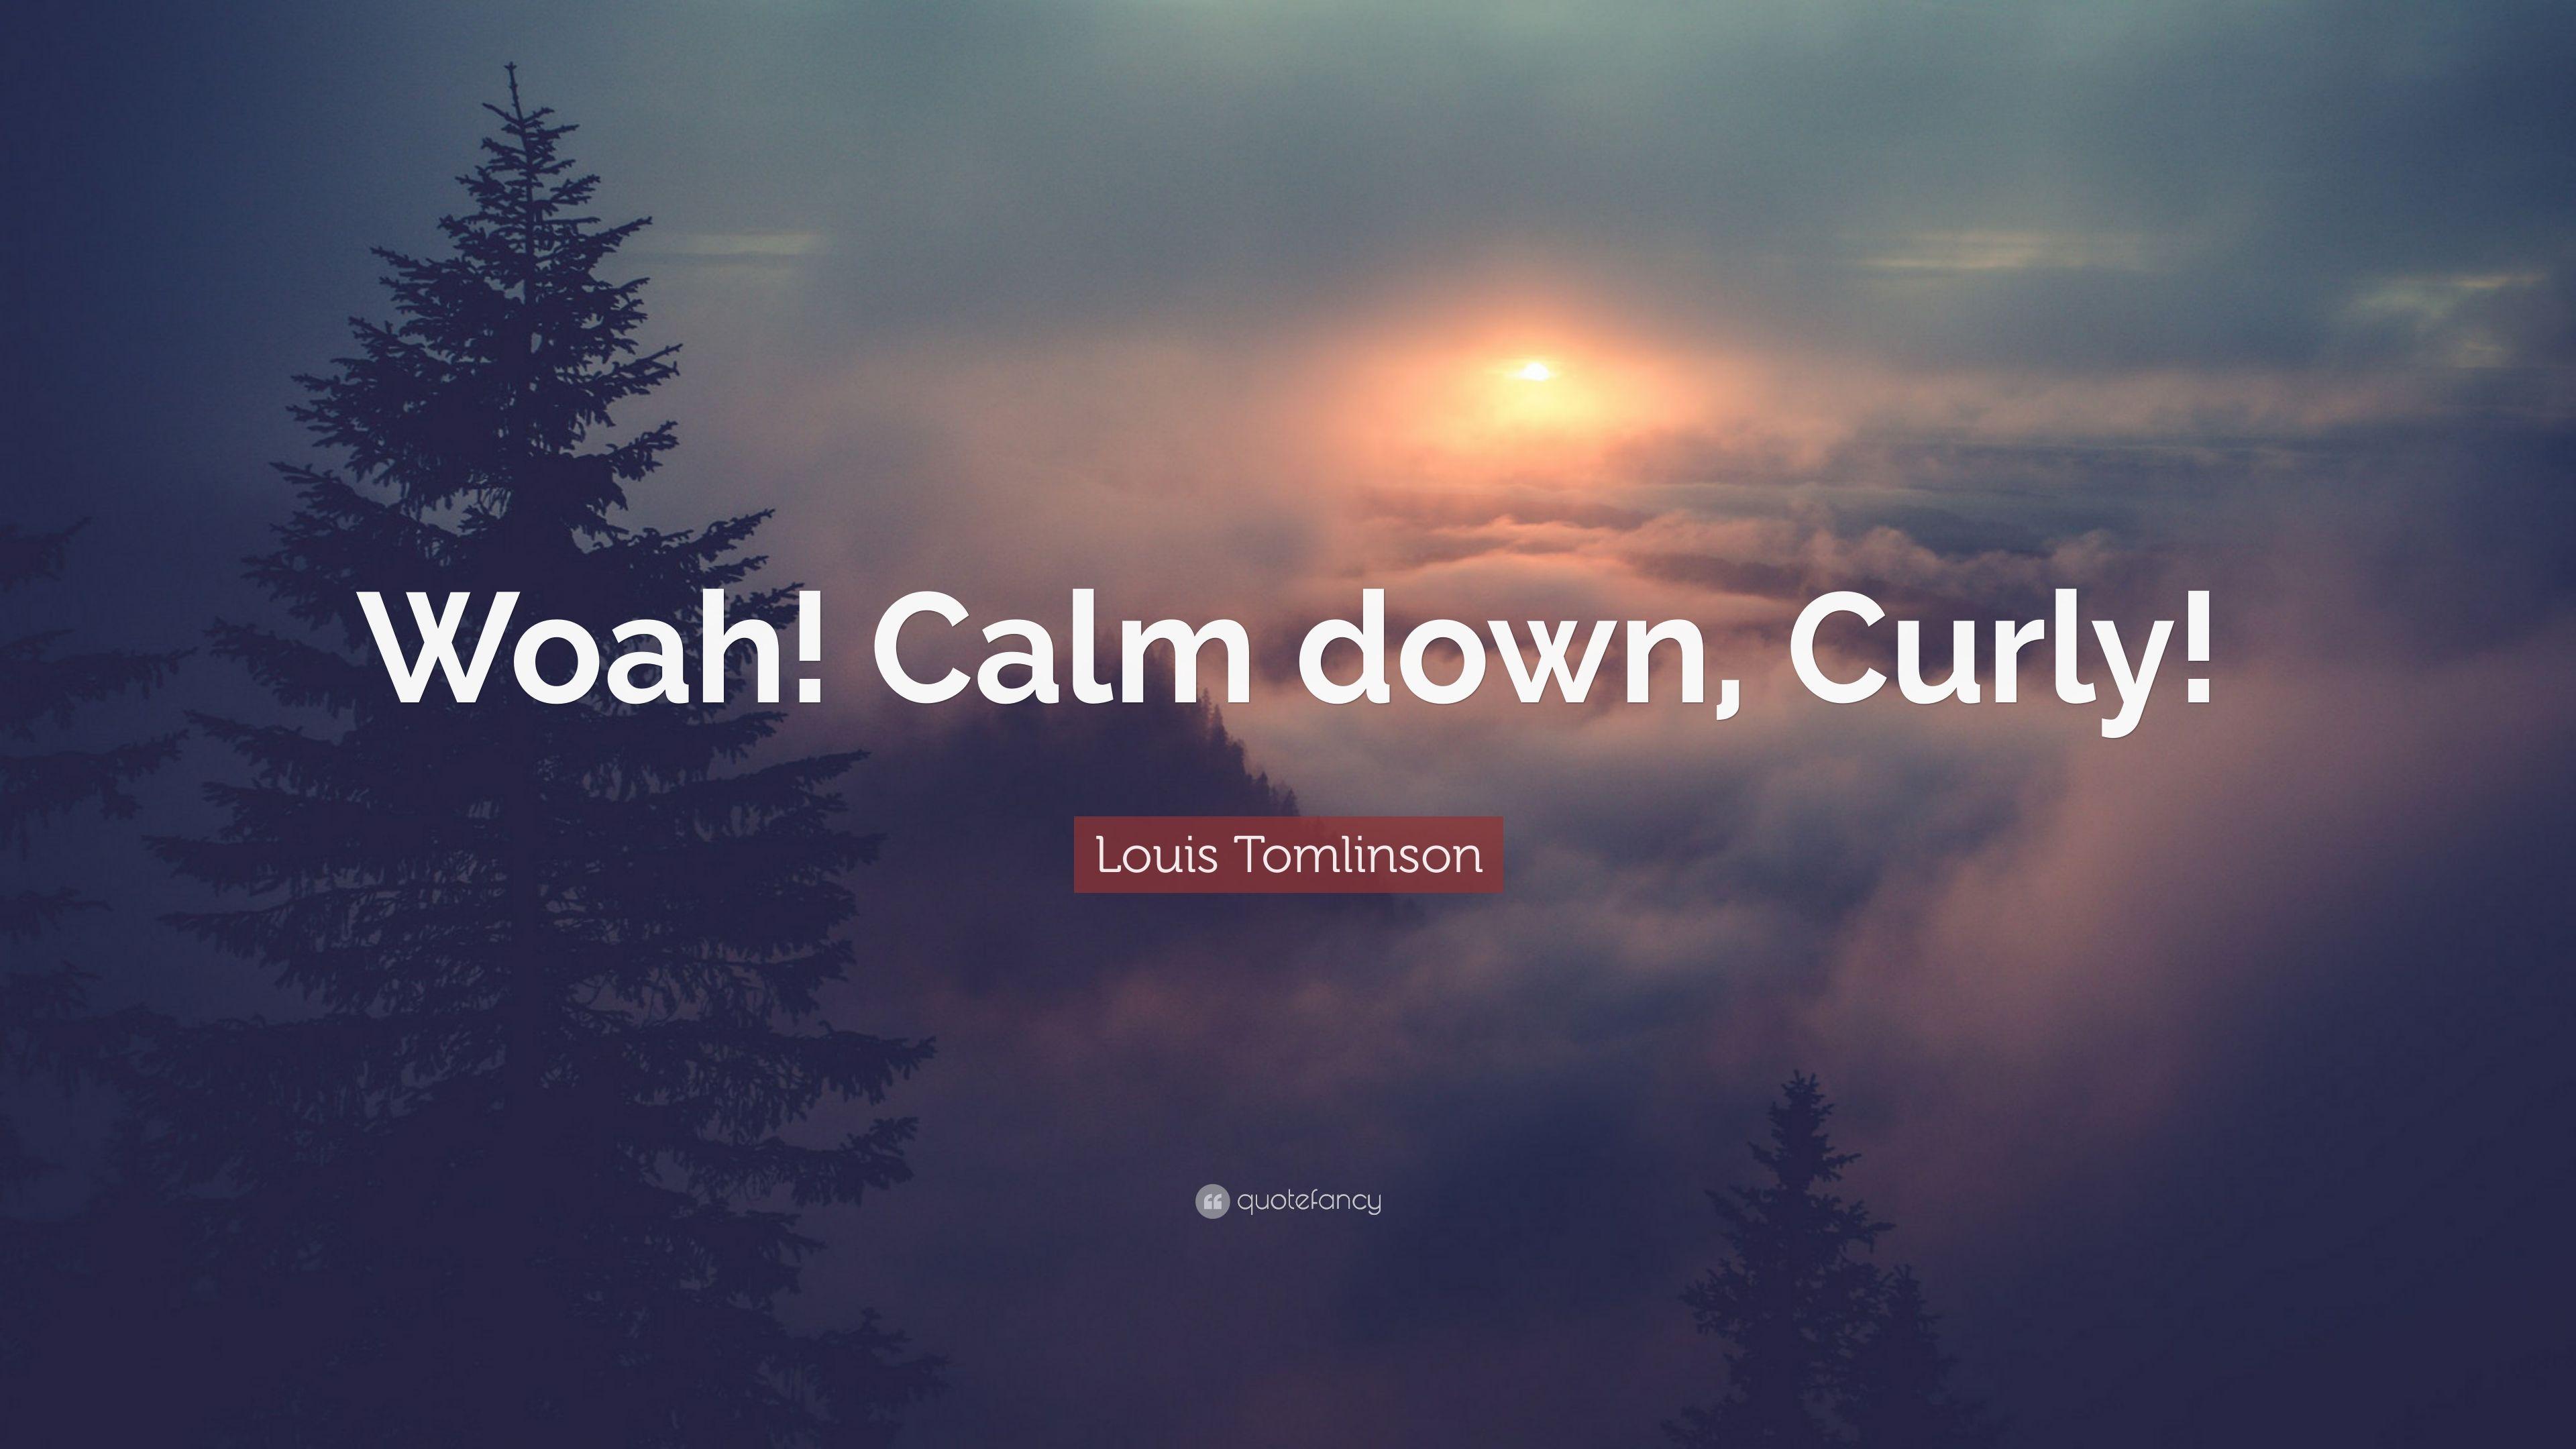 Louis Tomlinson Quote: “Woah! Calm down, Curly!” 7